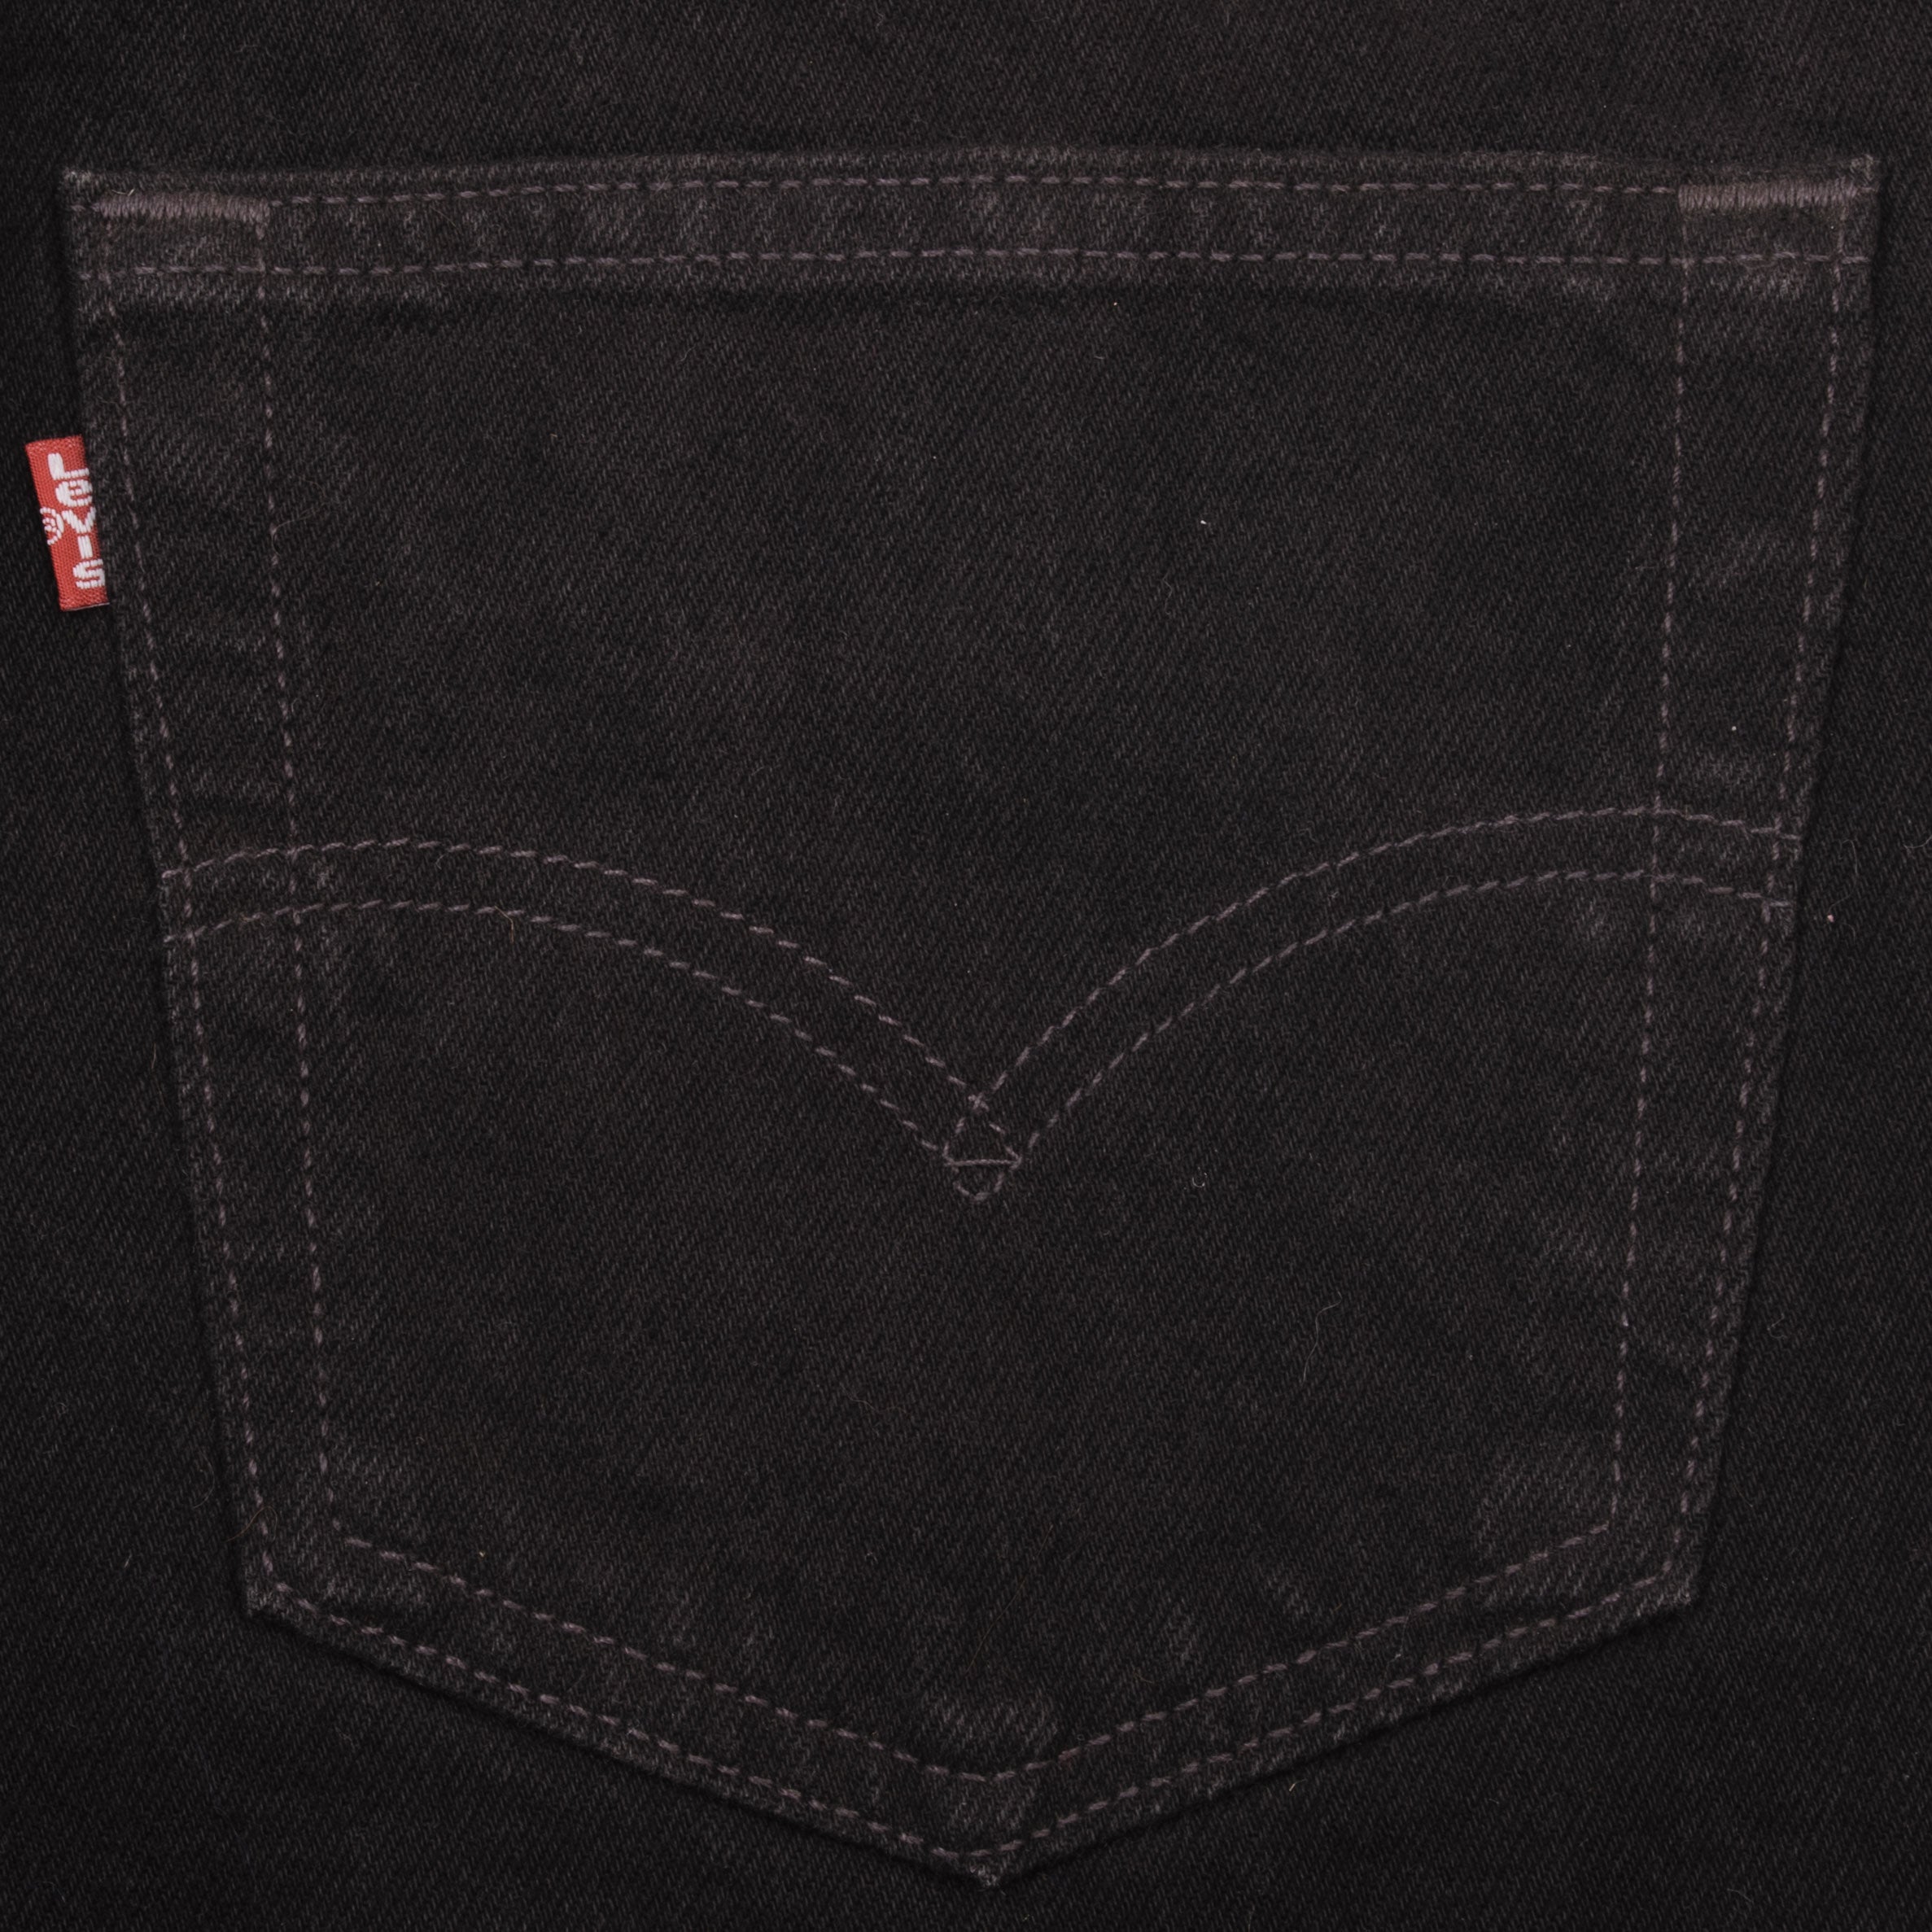 VINTAGE LEVIS 501 JEANS BLACK 1990S SIZE W33 L30 MADE IN USA – Vintage rare  usa